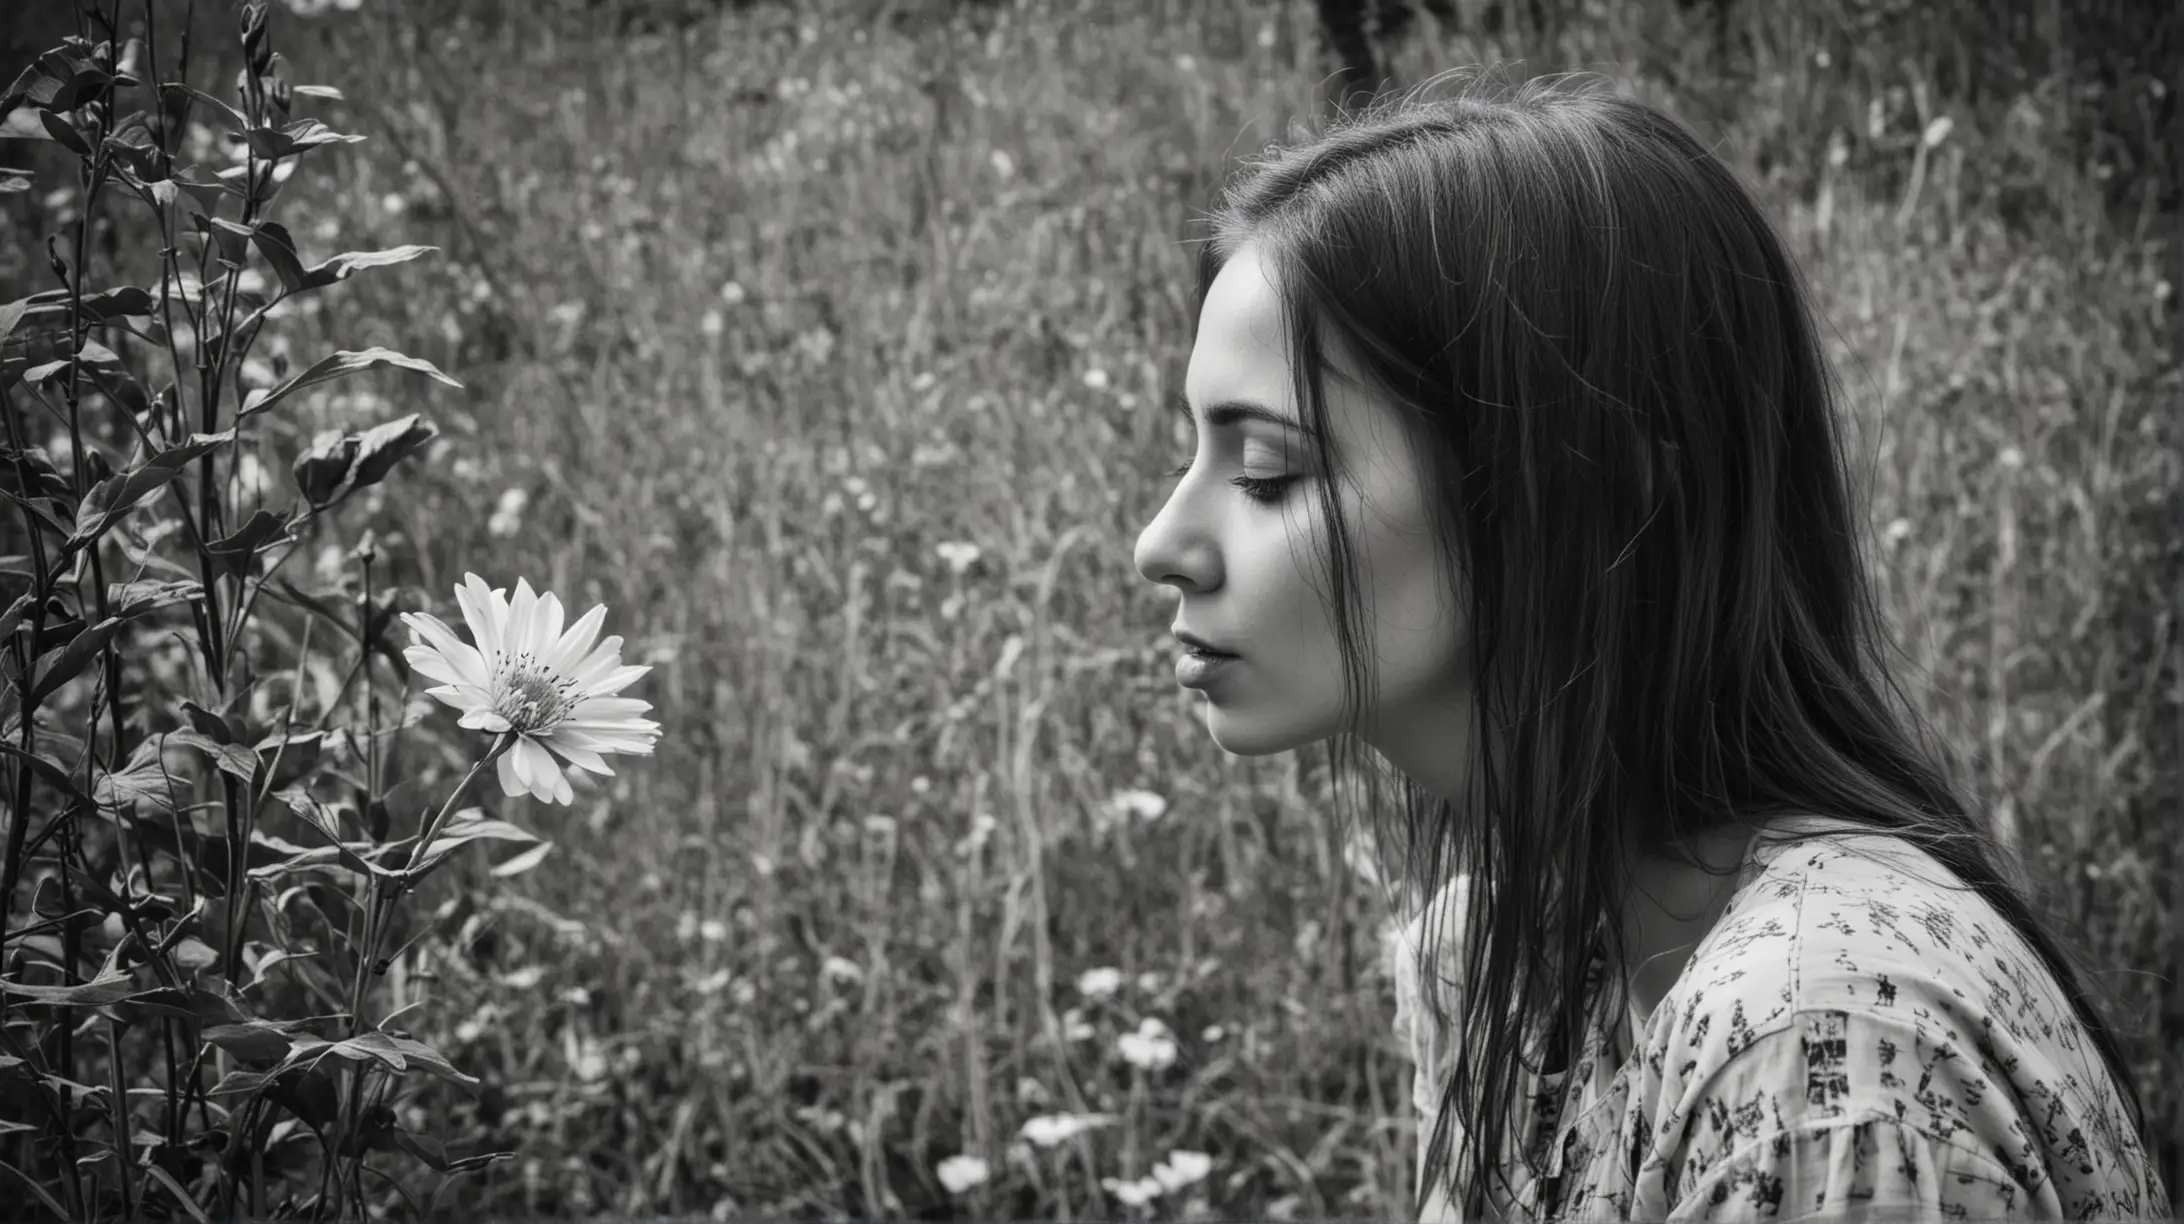 Woman Smelling Flower Side View in Grunge Black and White